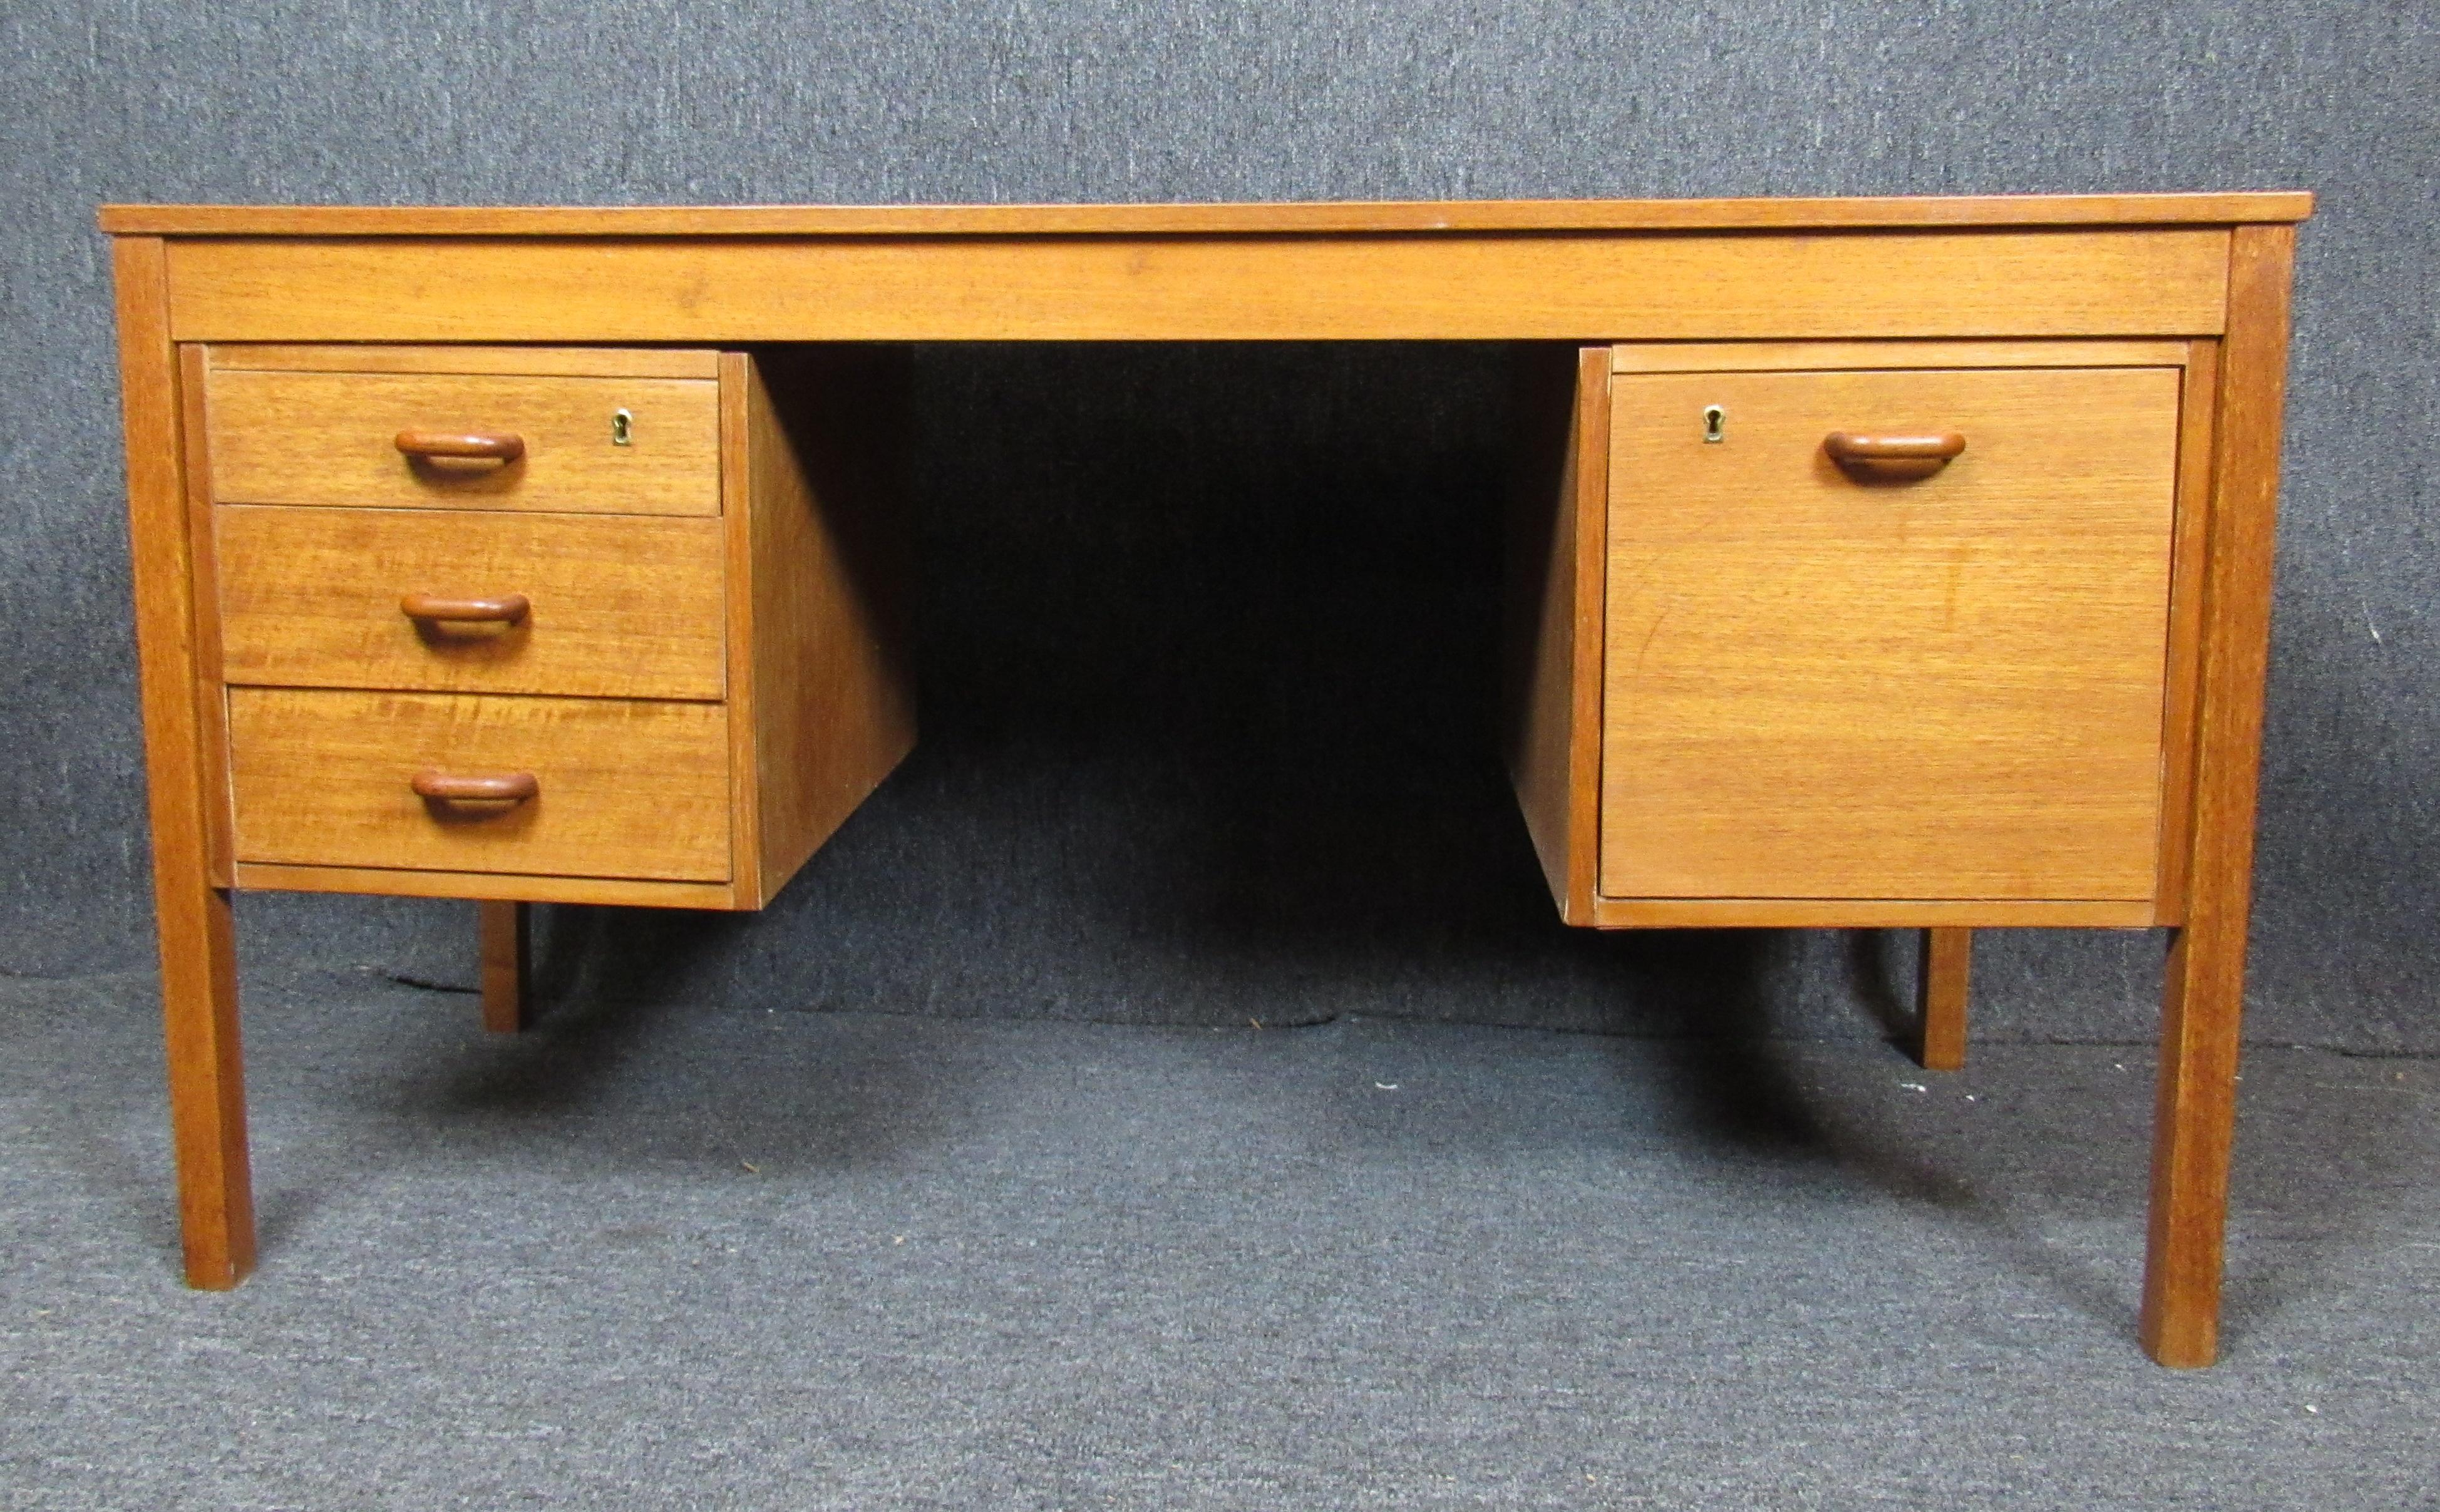 Mid-century modern office desk with two banks of drawers. Danish made teak wood desk for home or office use.
Please confirm location NY or NJ